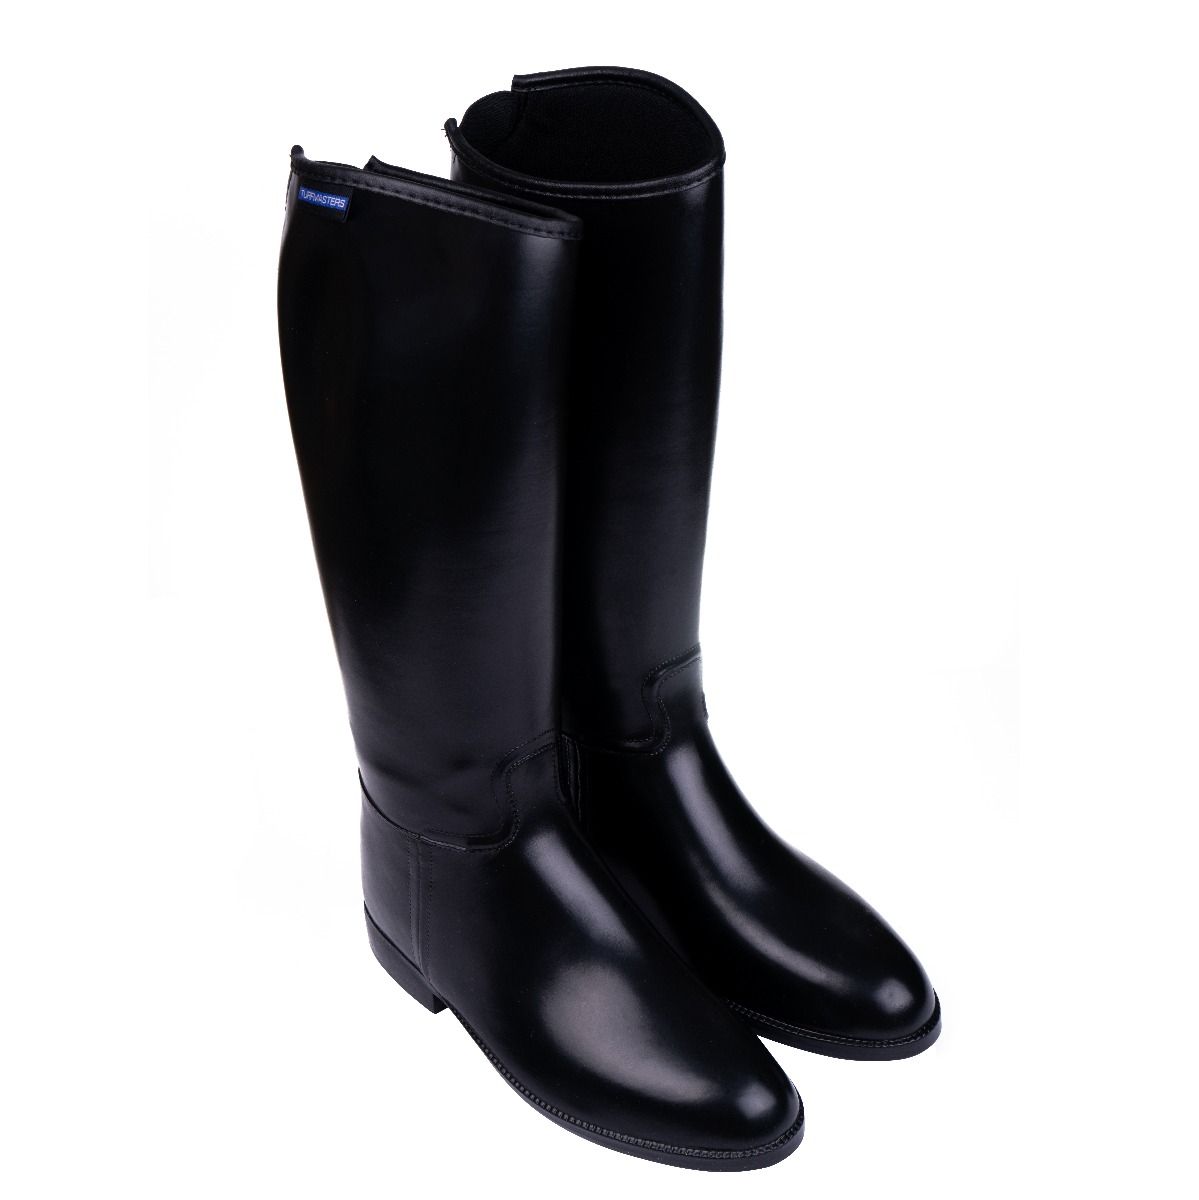 Turfmasters Long Rubber Boots